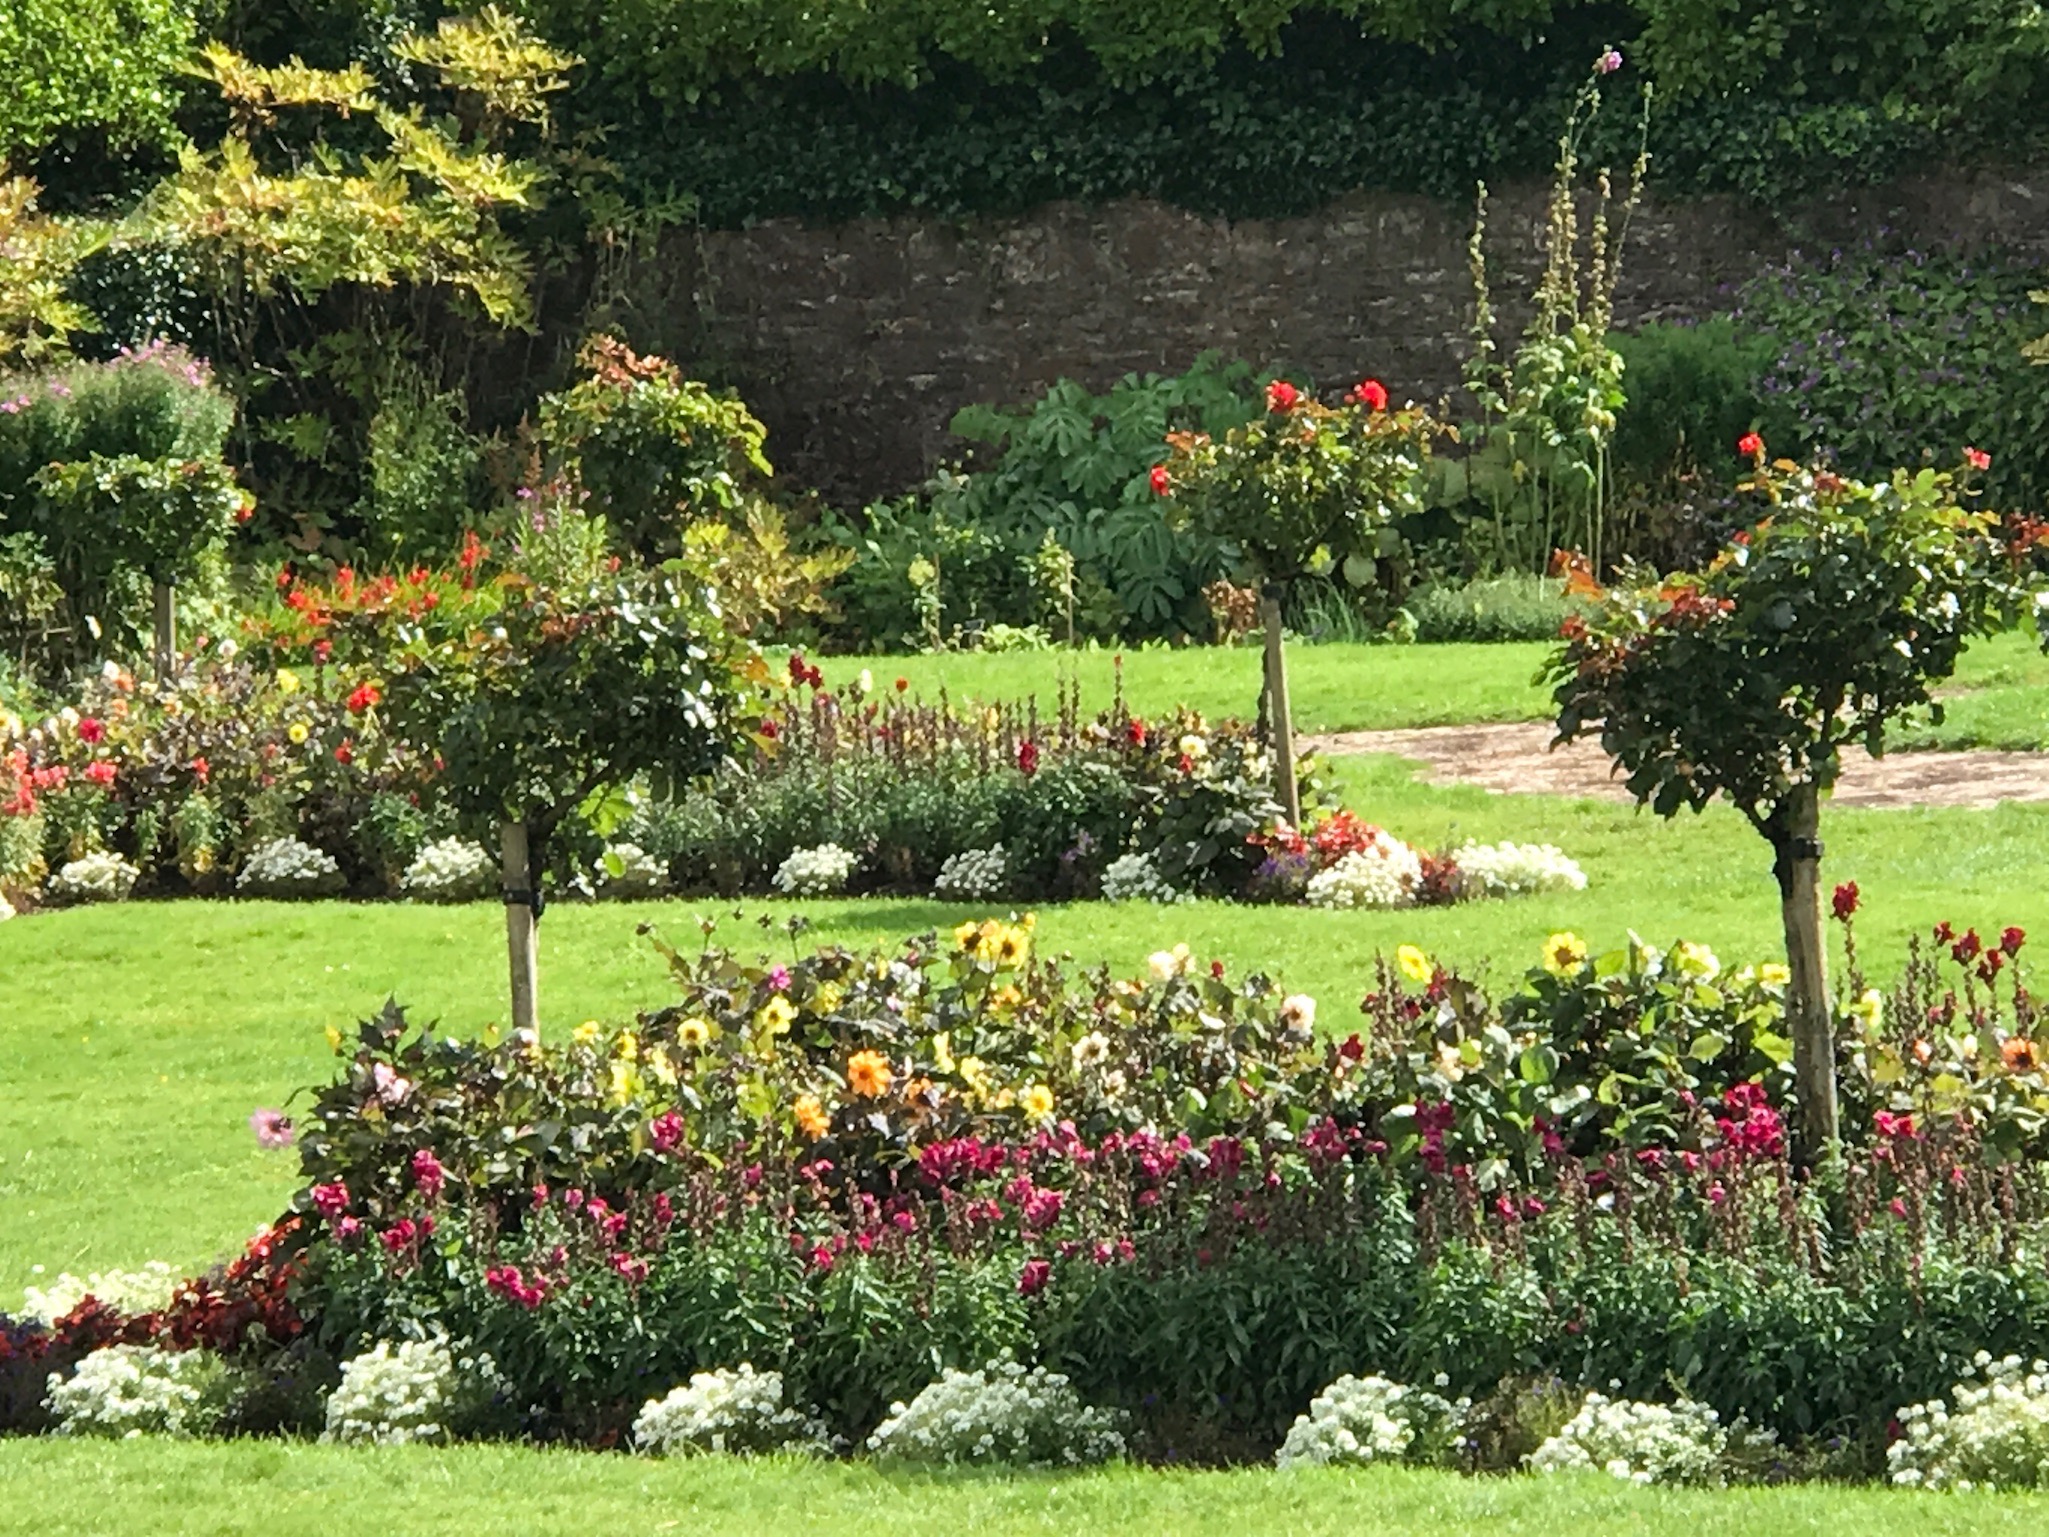 The gardens at the Muckross House